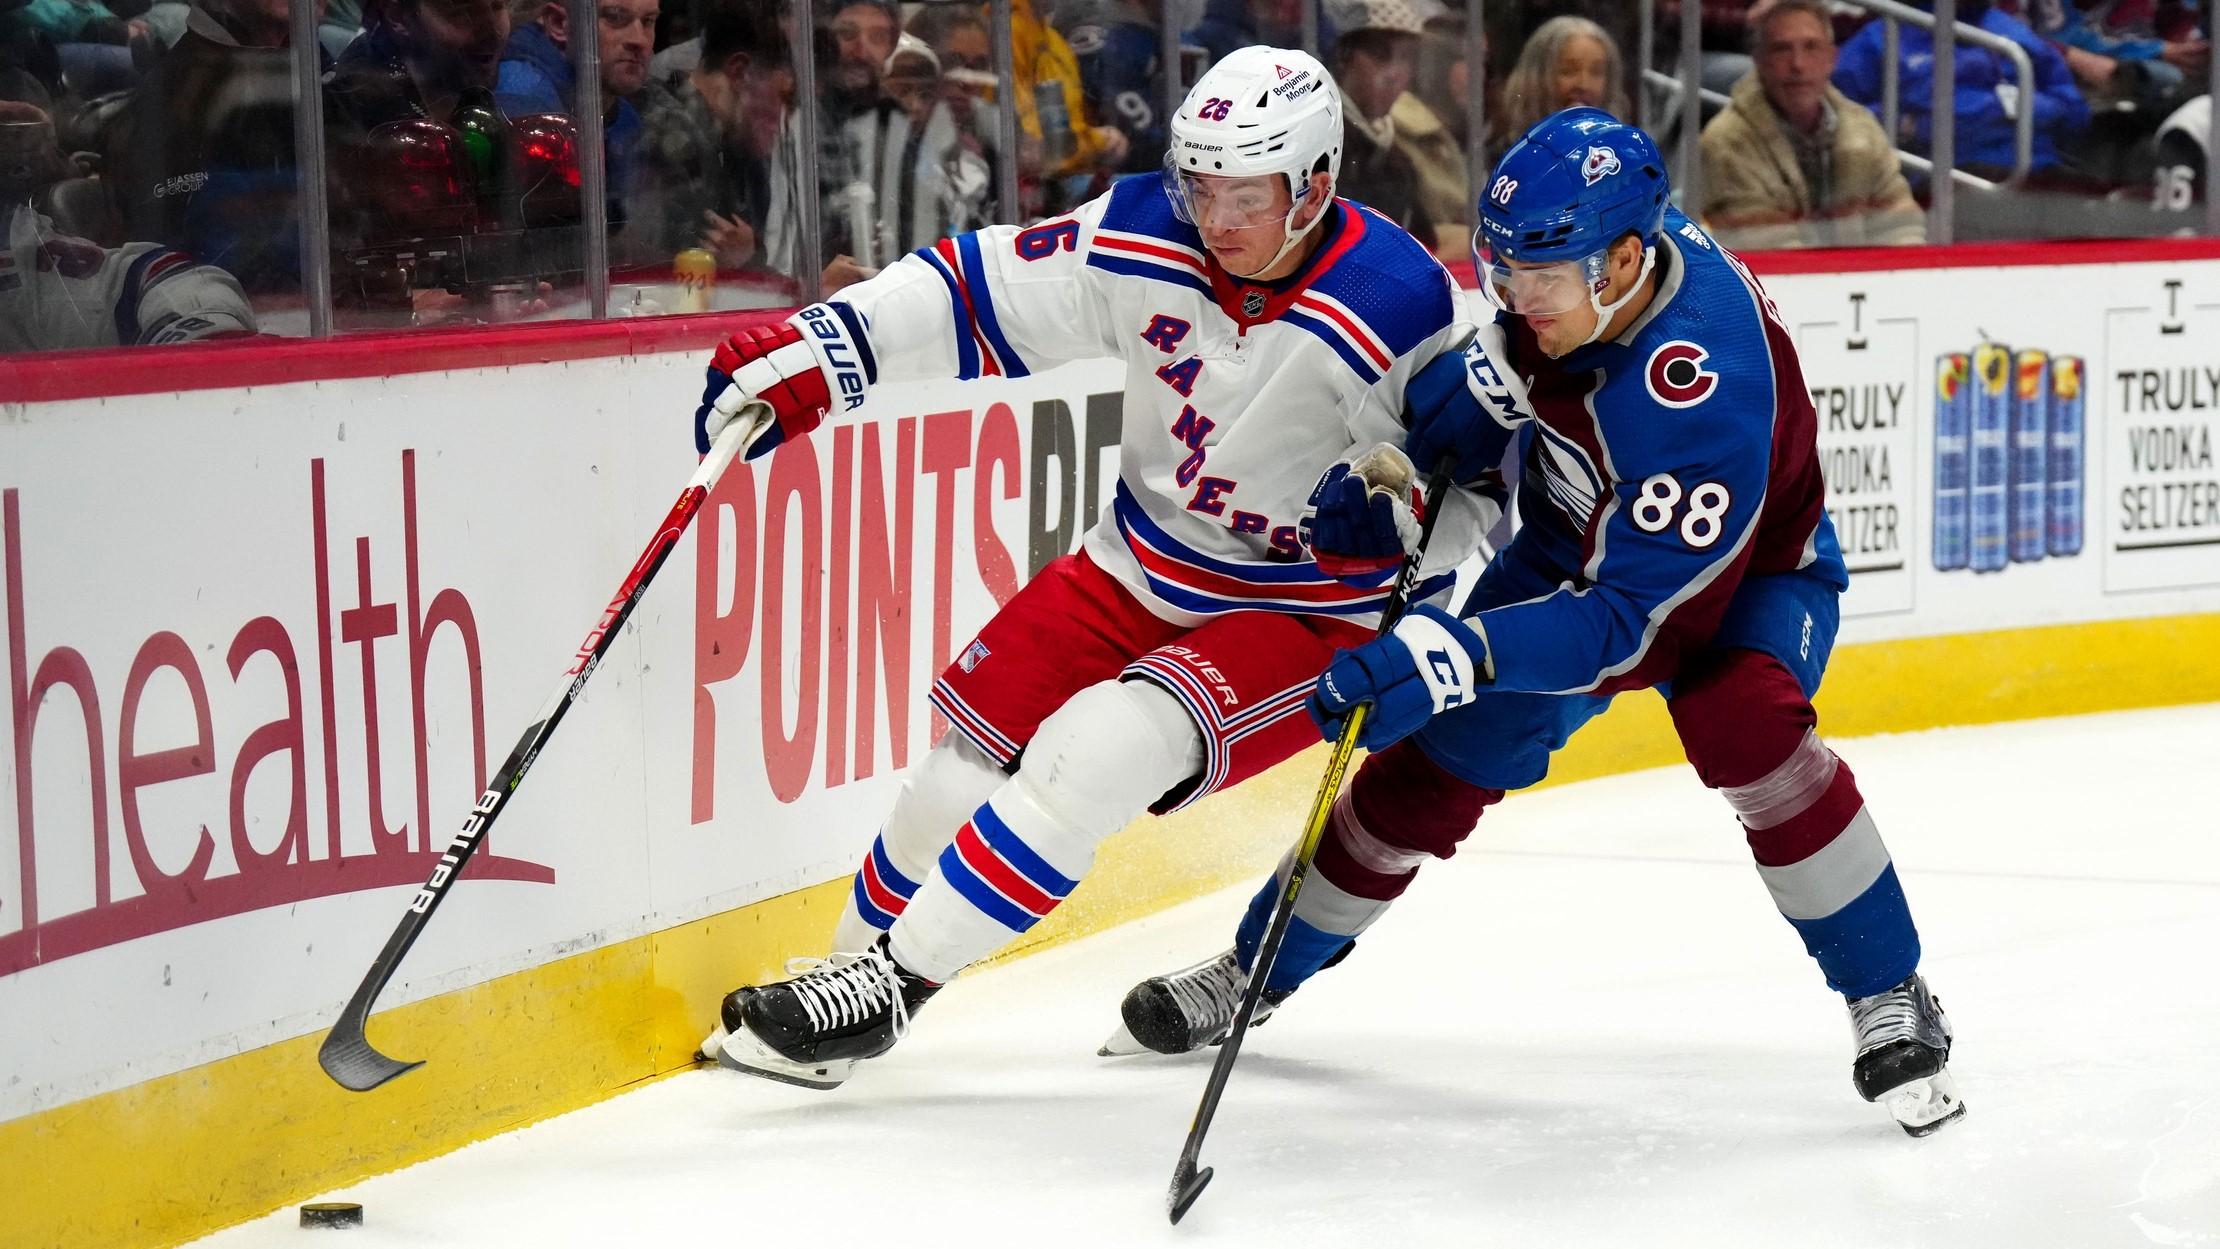 Dec 9, 2022; Denver, Colorado, USA; New York Rangers left wing Jimmy Vesey (26) and Colorado Avalanche defenseman Andreas Englund (88) battle for control of the puck in the first period at Ball Arena. / Ron Chenoy-USA TODAY Sports